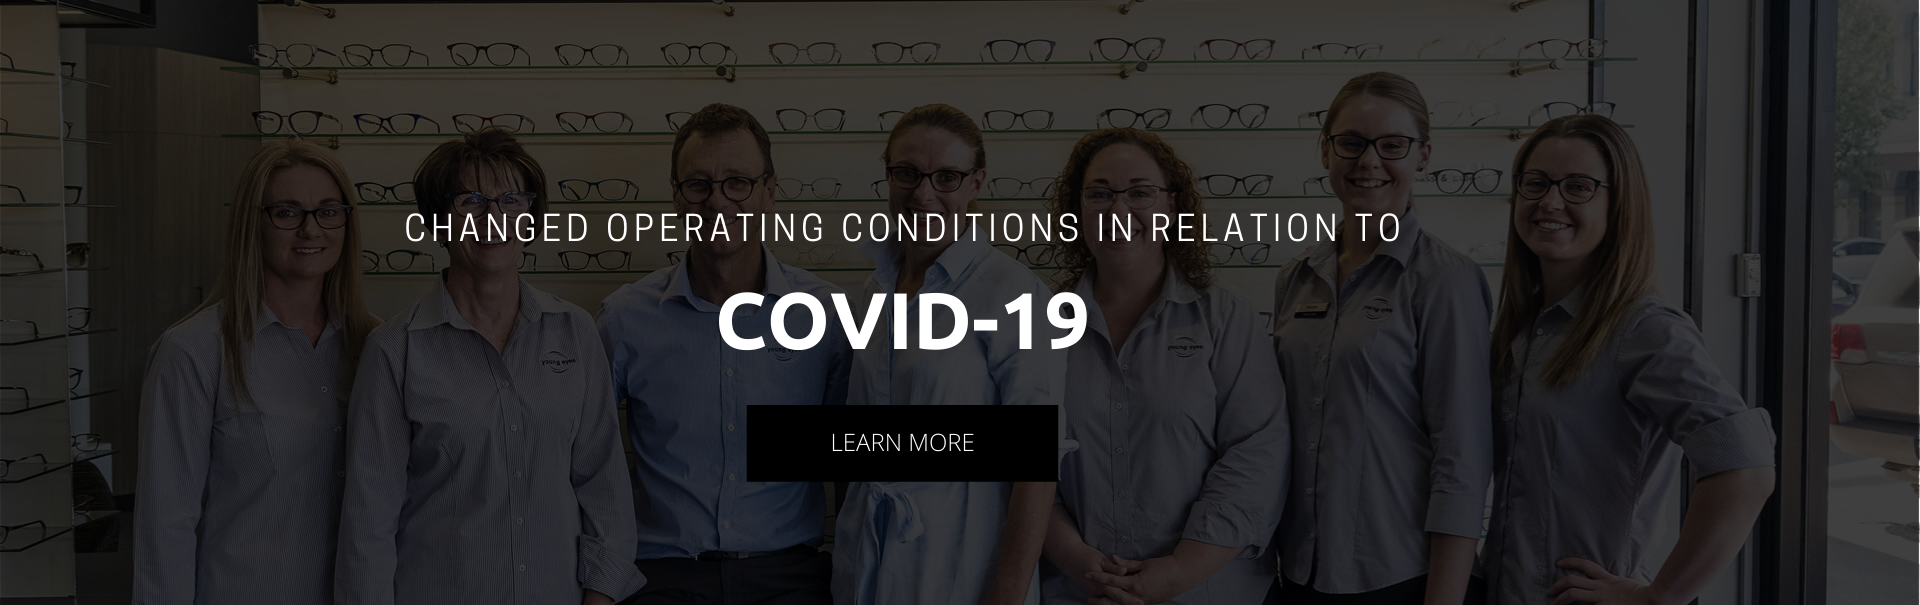 Changed operating conditions in relation to COVID-19